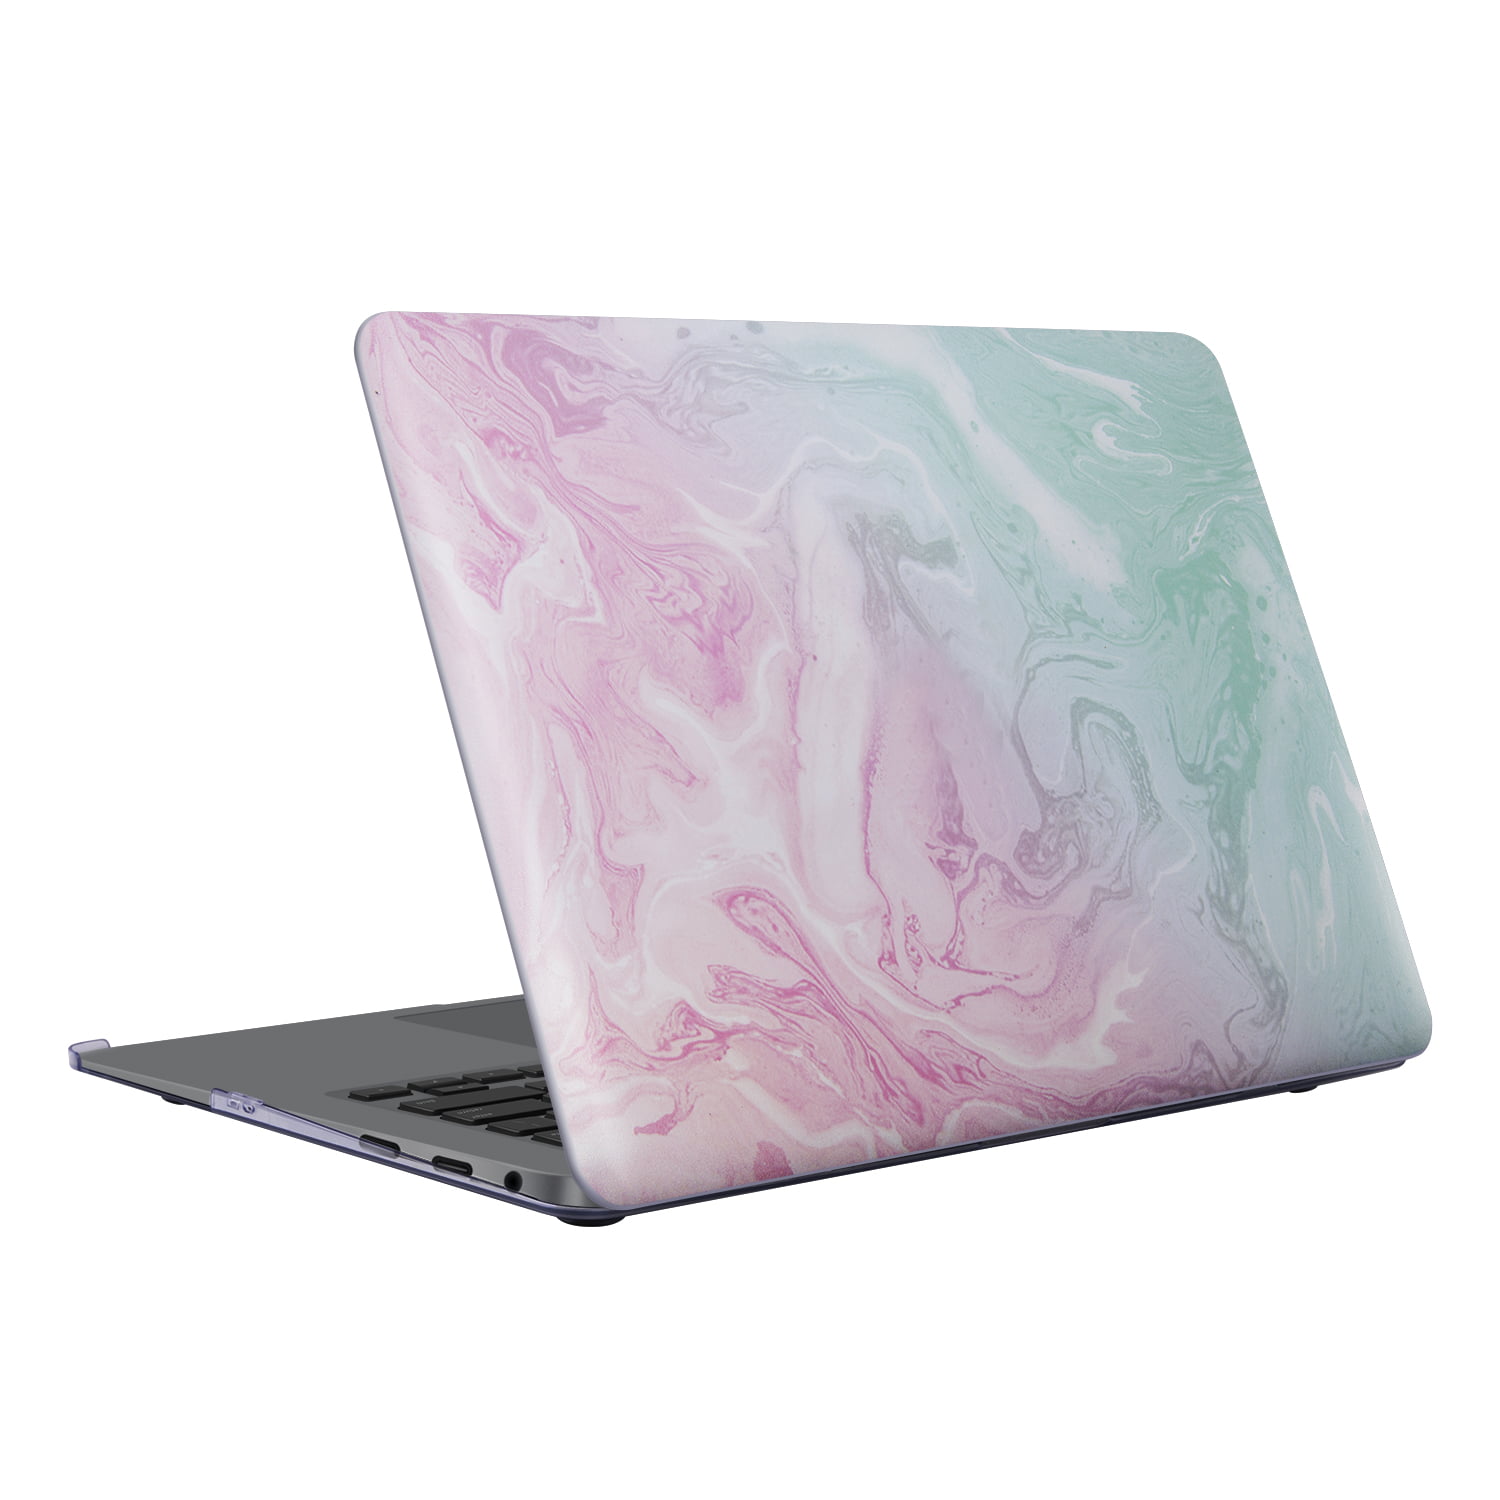 3in1 Fashion Lovely Girl Matte Hard Case Shell for MacBook AIR PRO 13" 15" 2018